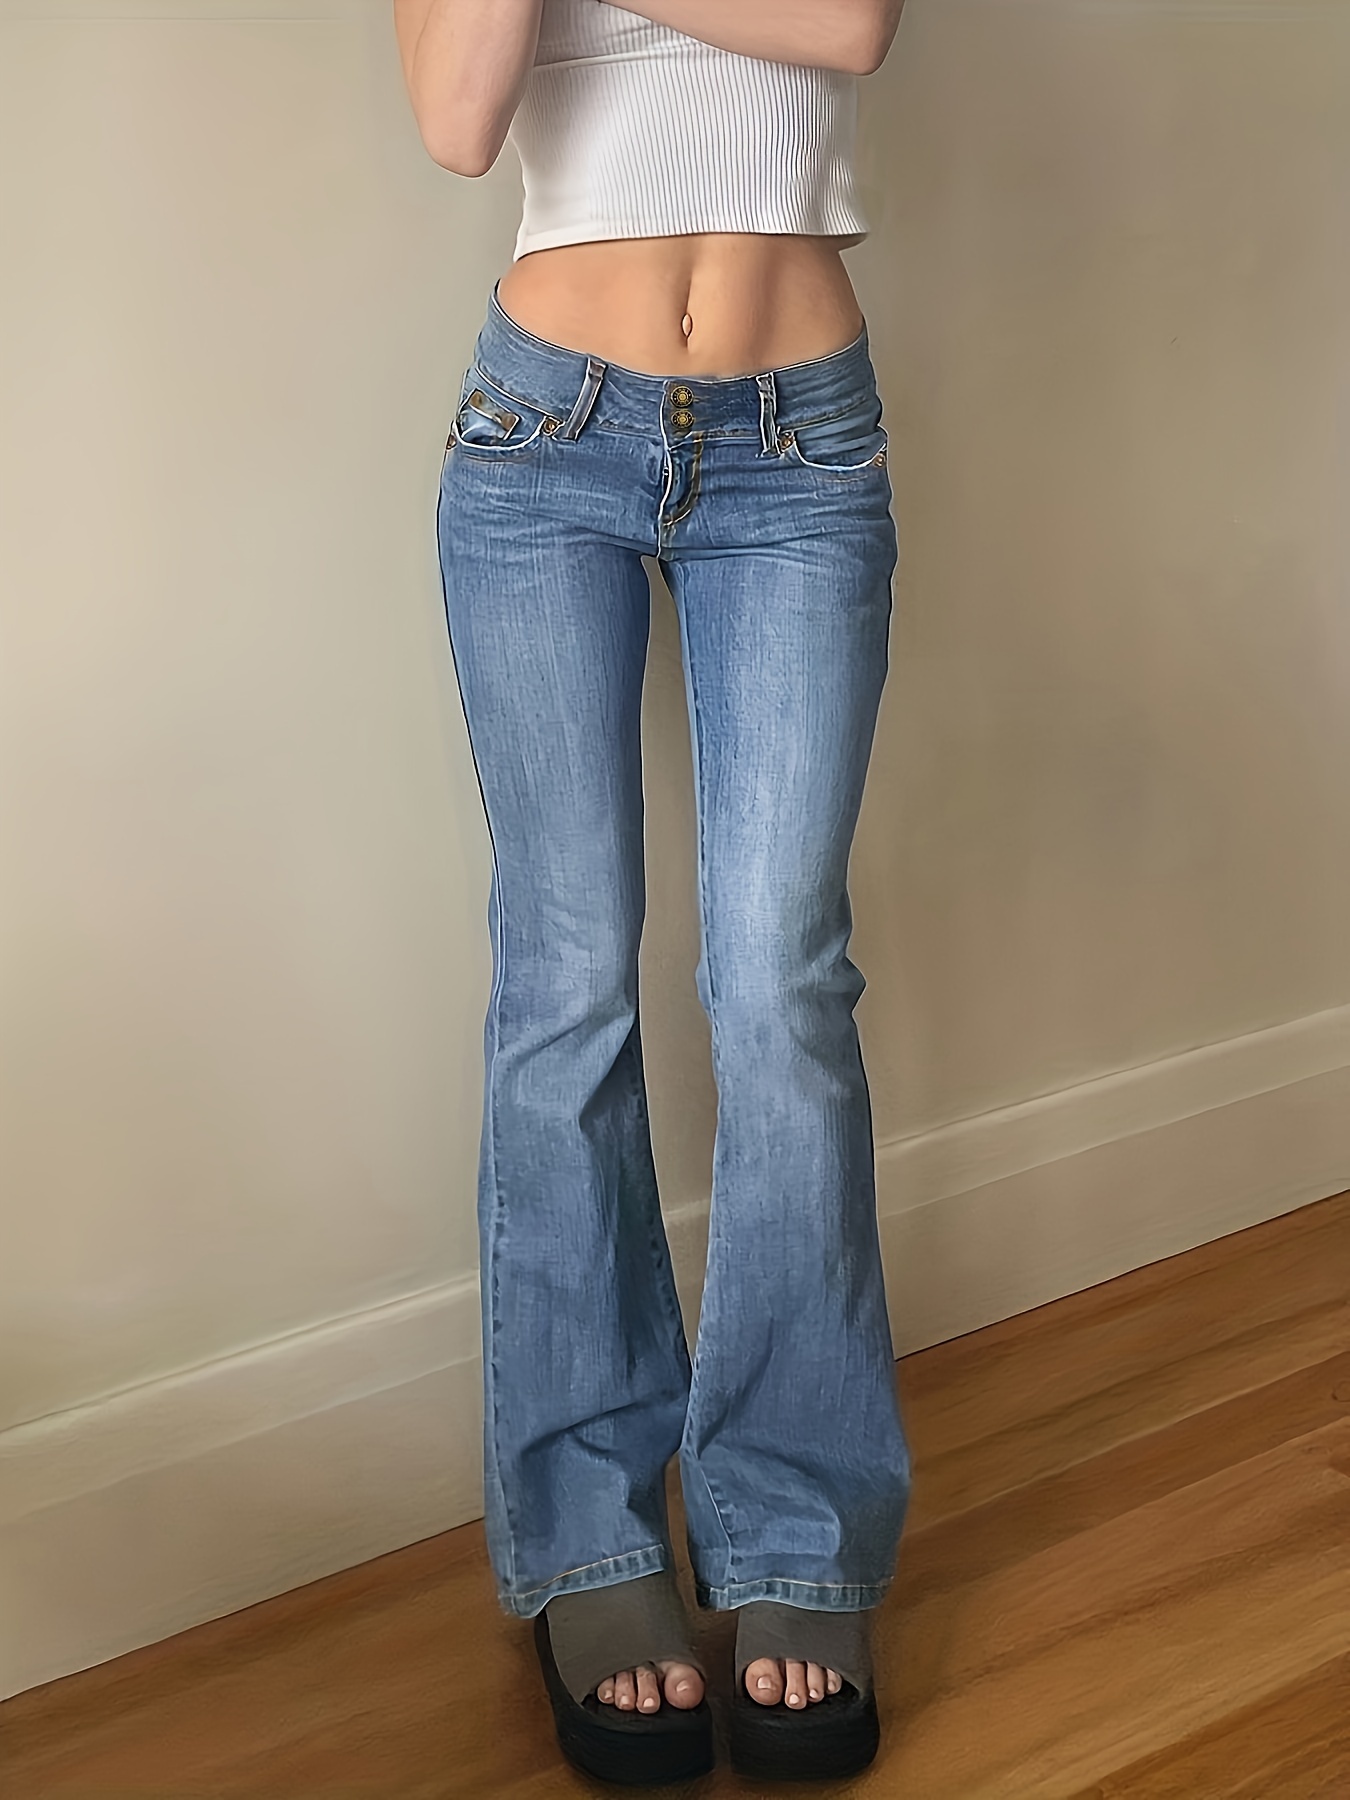 Shredded Stretch Low-rise Jeans  Low rise jeans, Low waist jeans